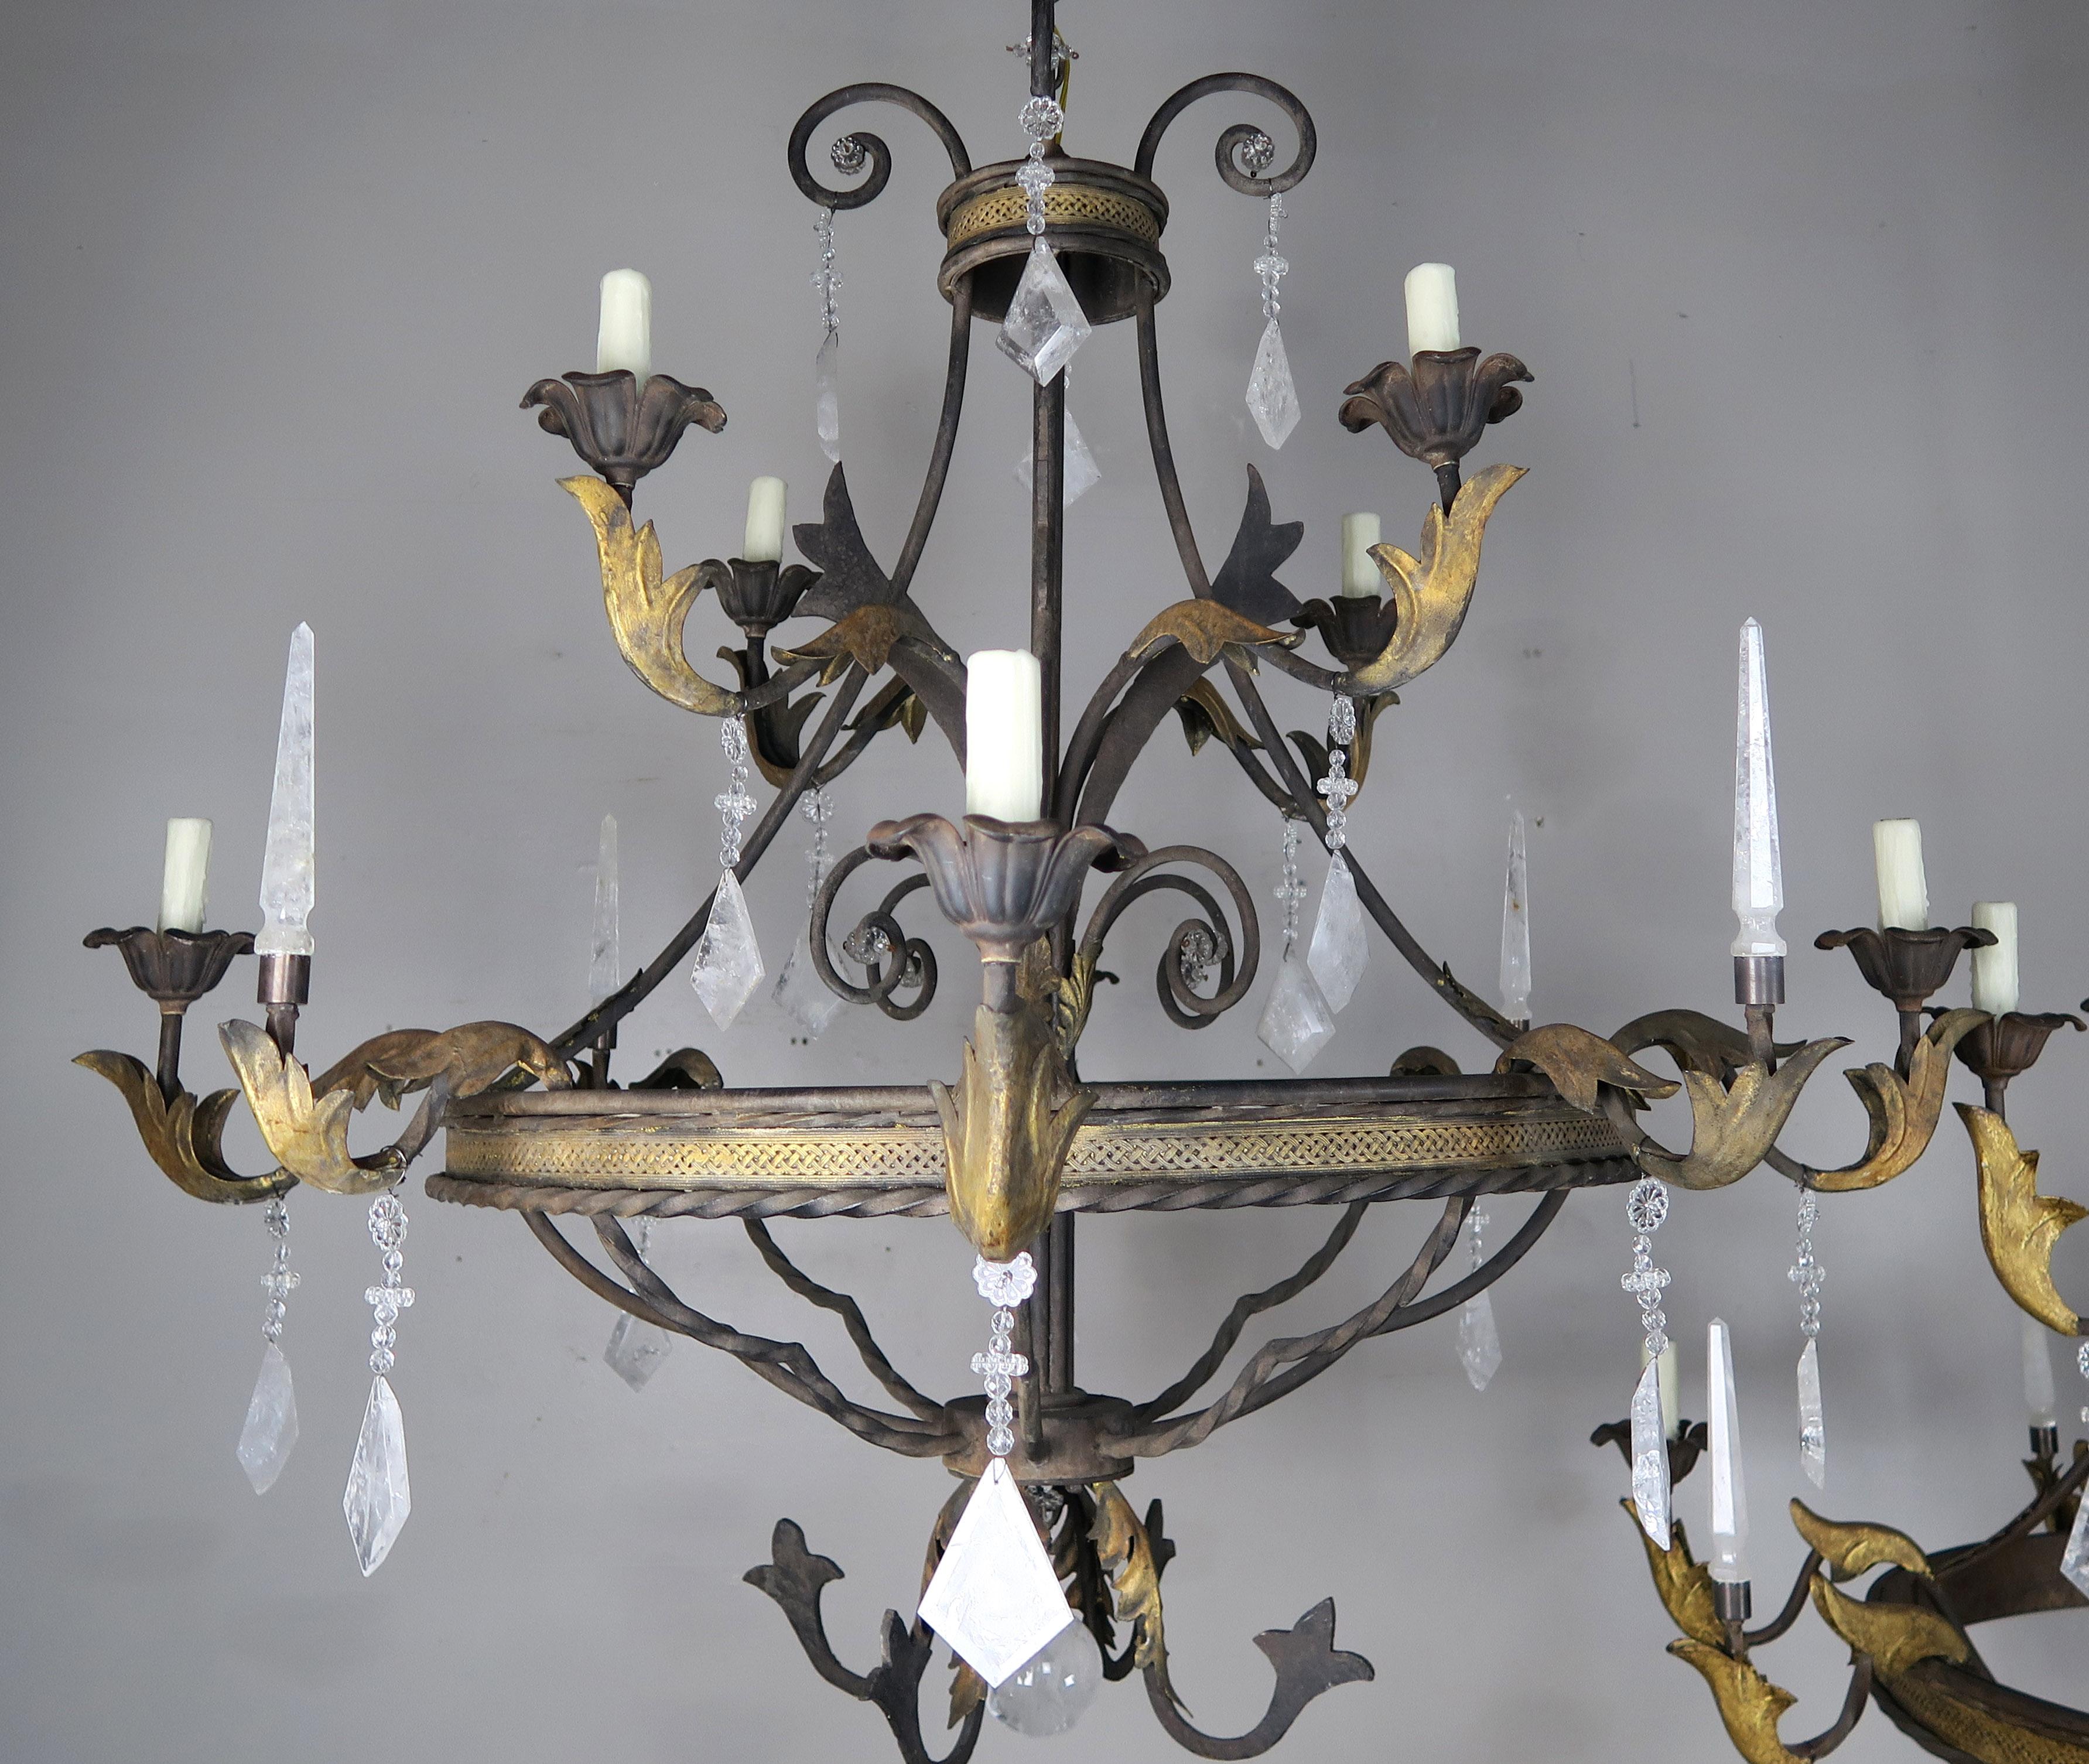 baroque style chandeliers